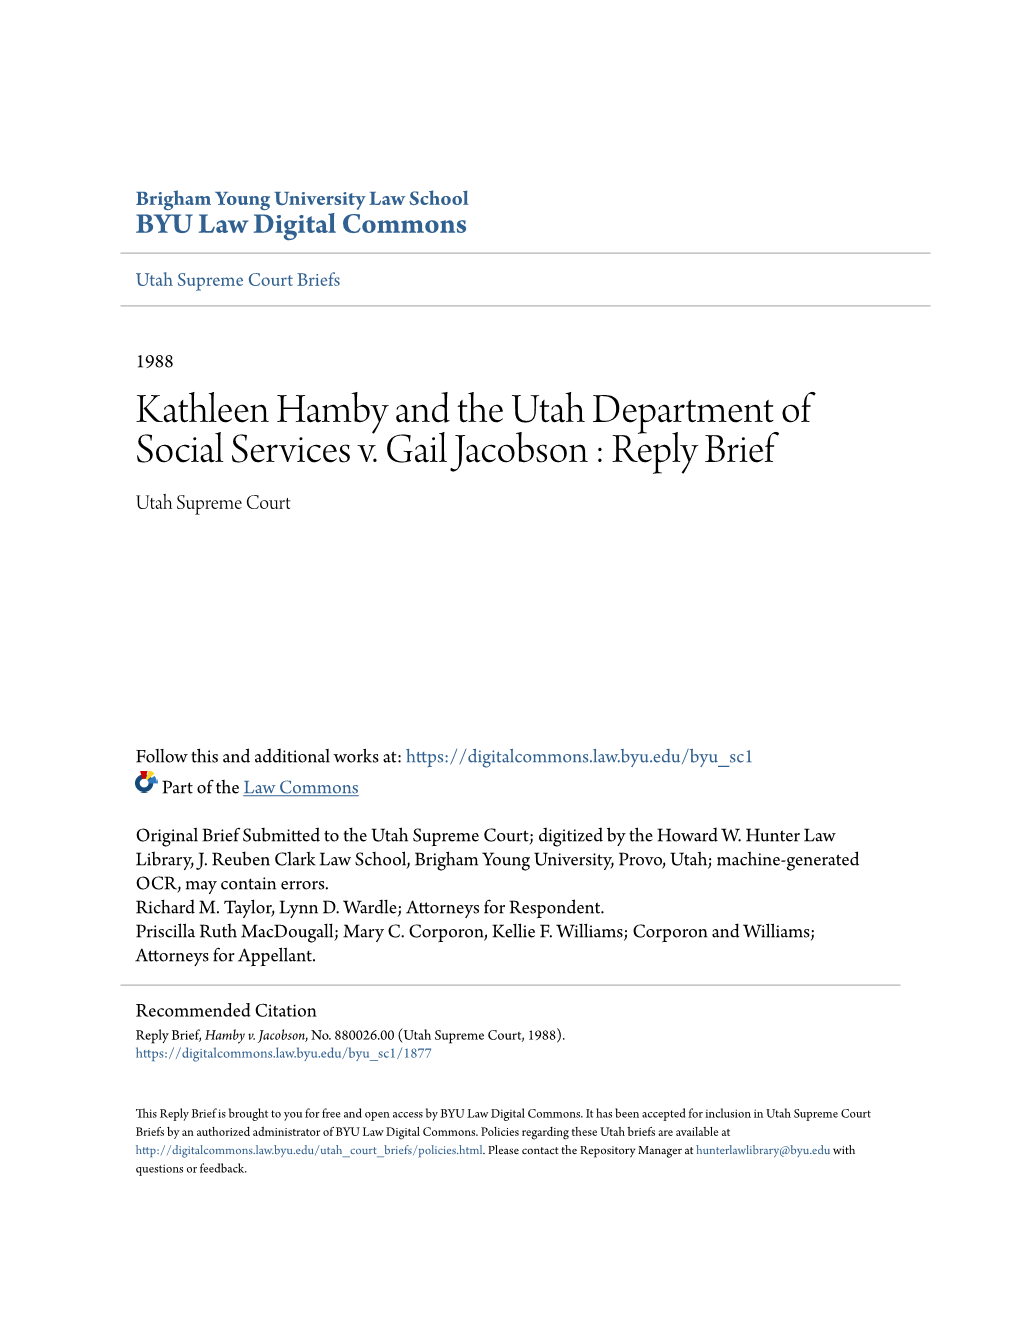 Kathleen Hamby and the Utah Department of Social Services V